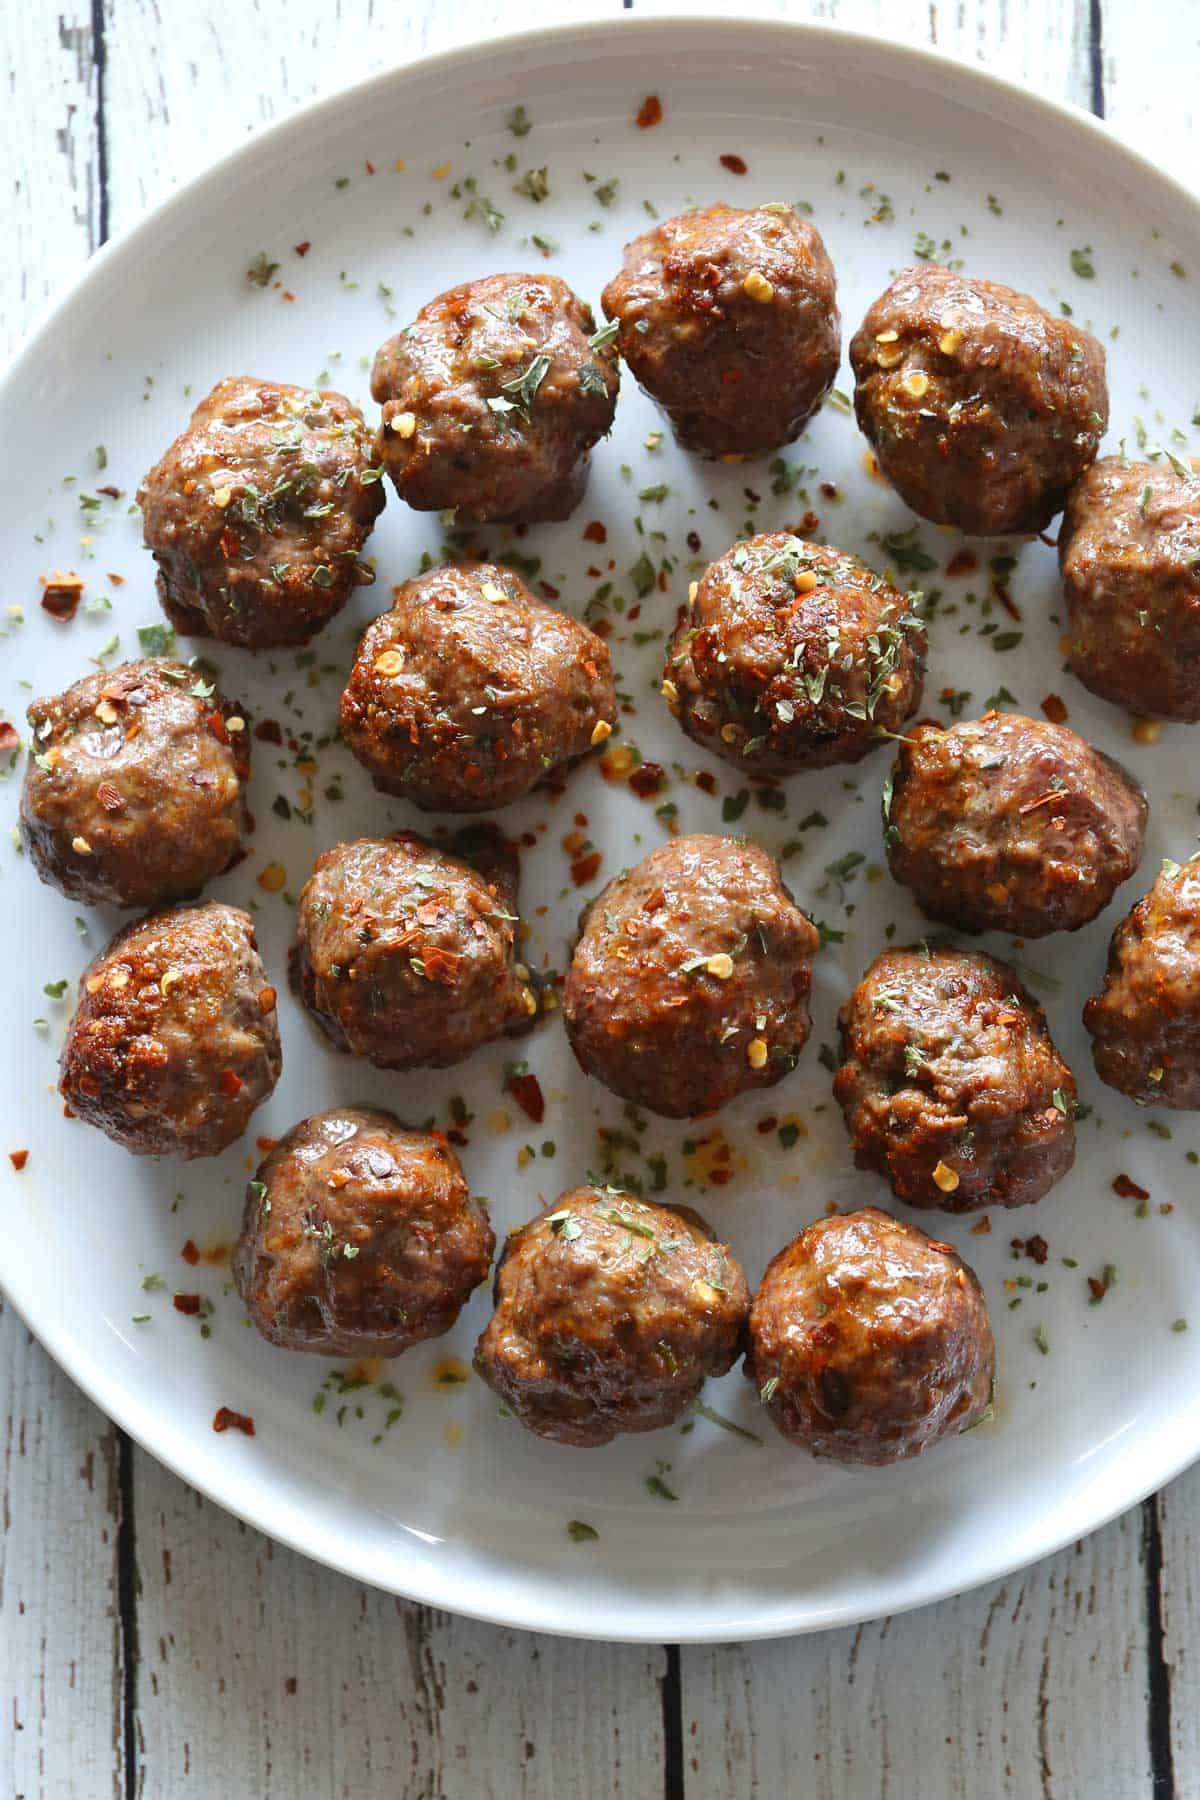 Keto meatballs are served on a white plate.